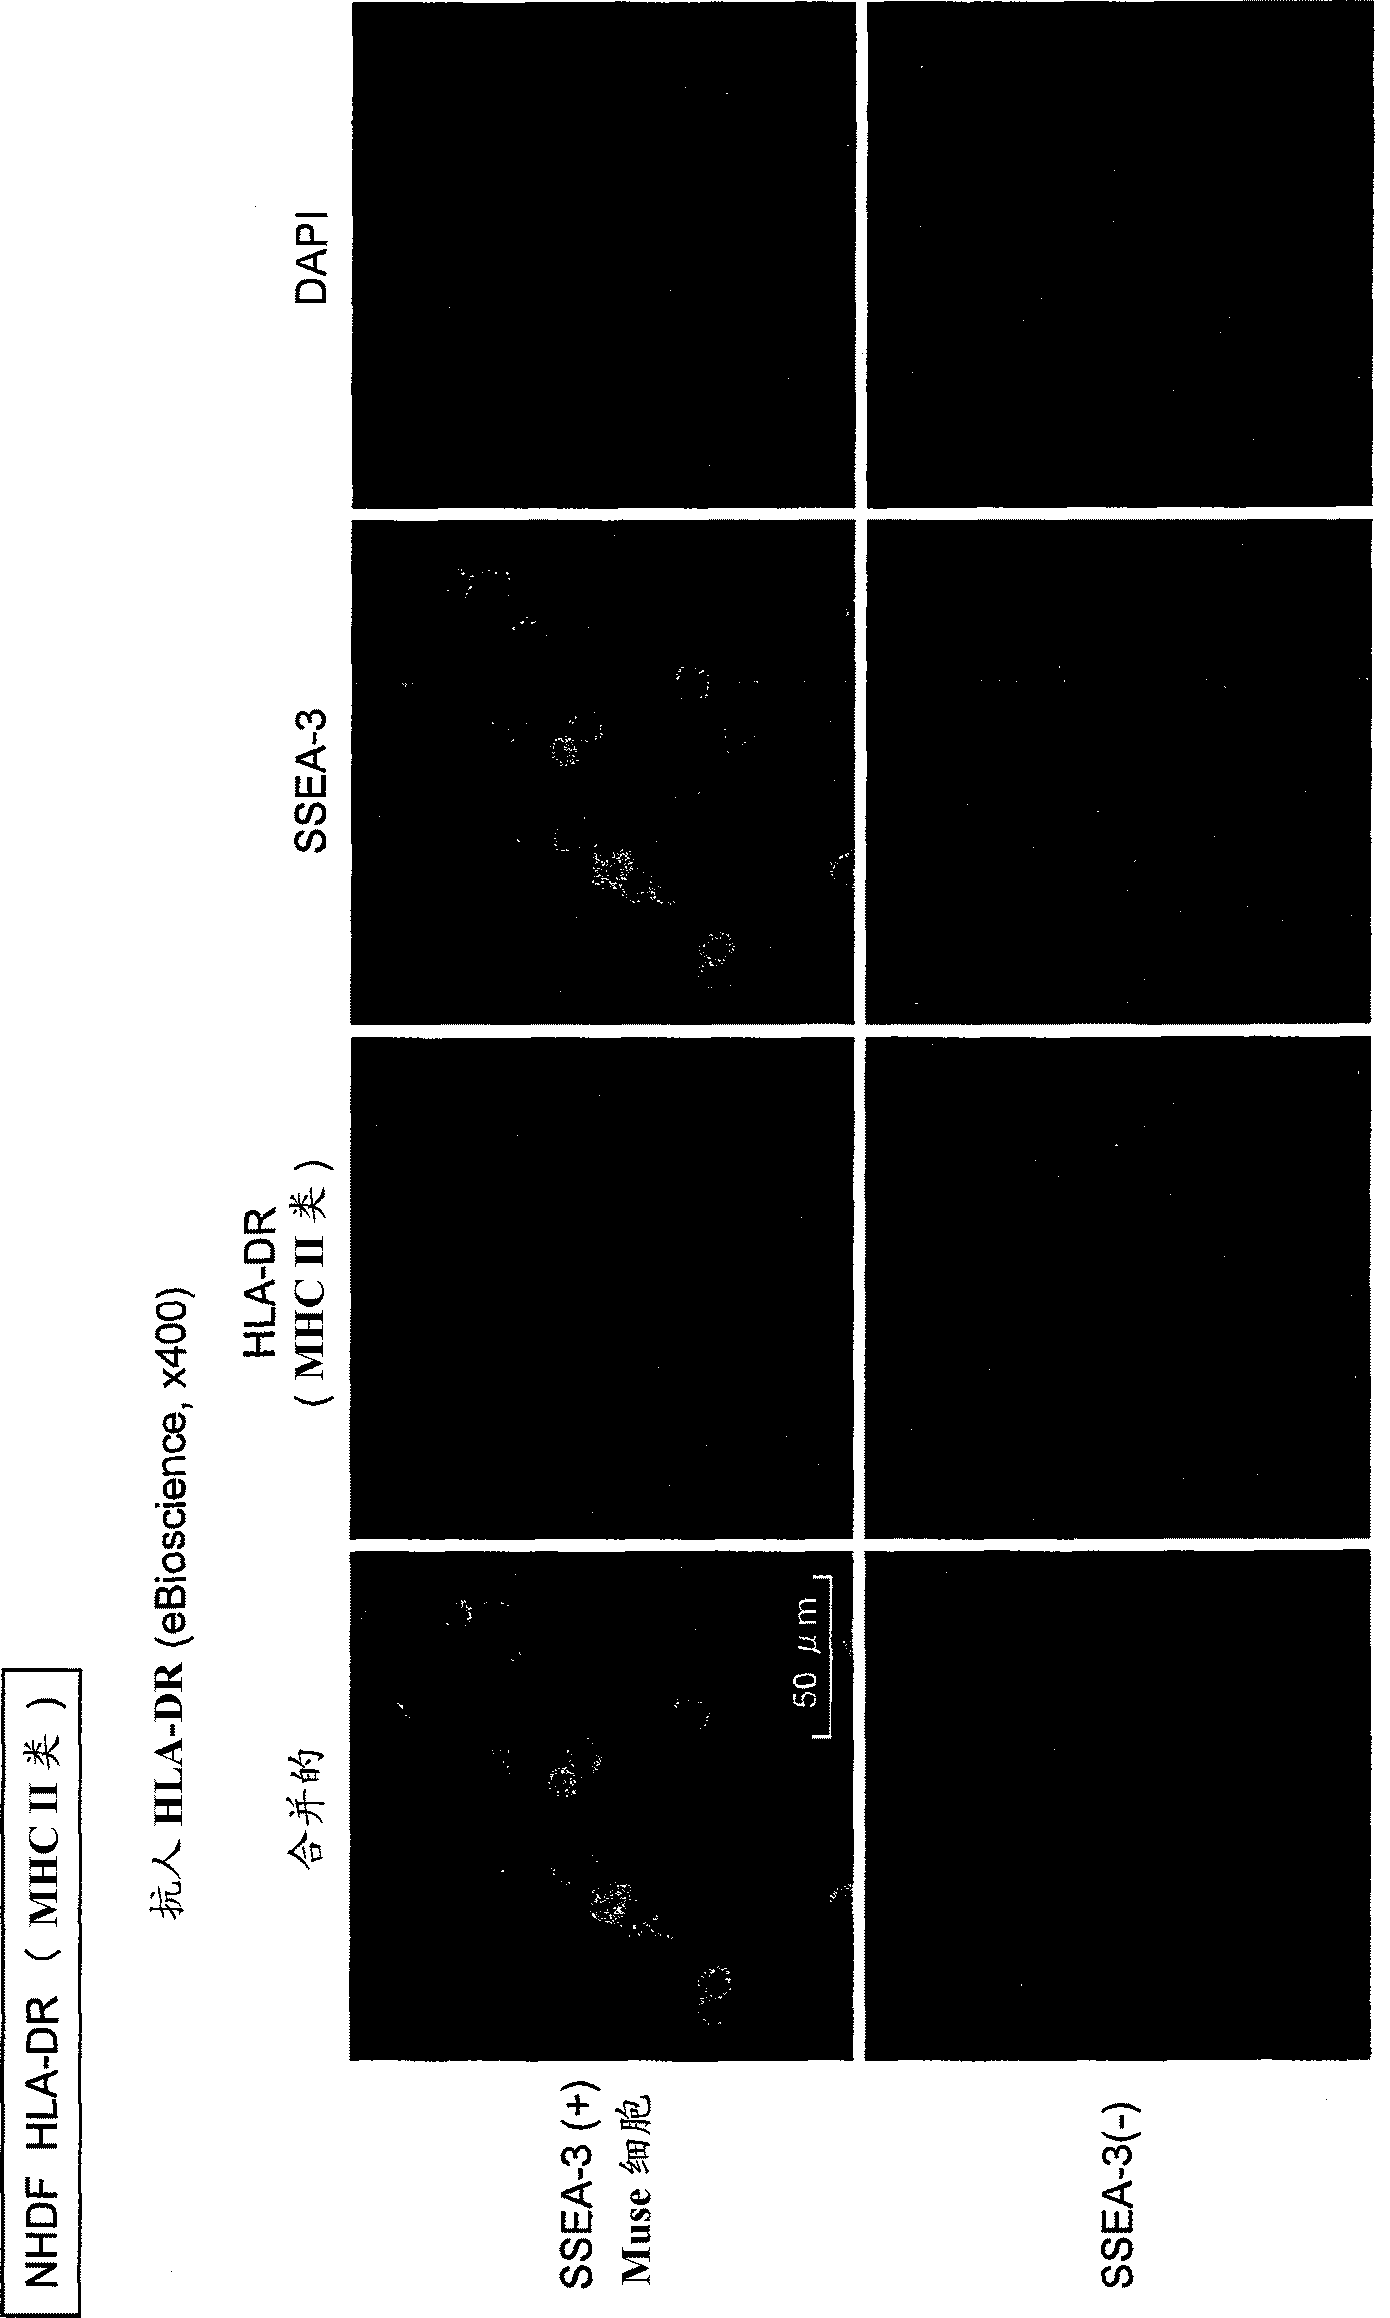 Composition for allotransplantation cell therapy, said composition containing SSEA-3 positive pluripotent stem cell capable of being isolated from body tissue